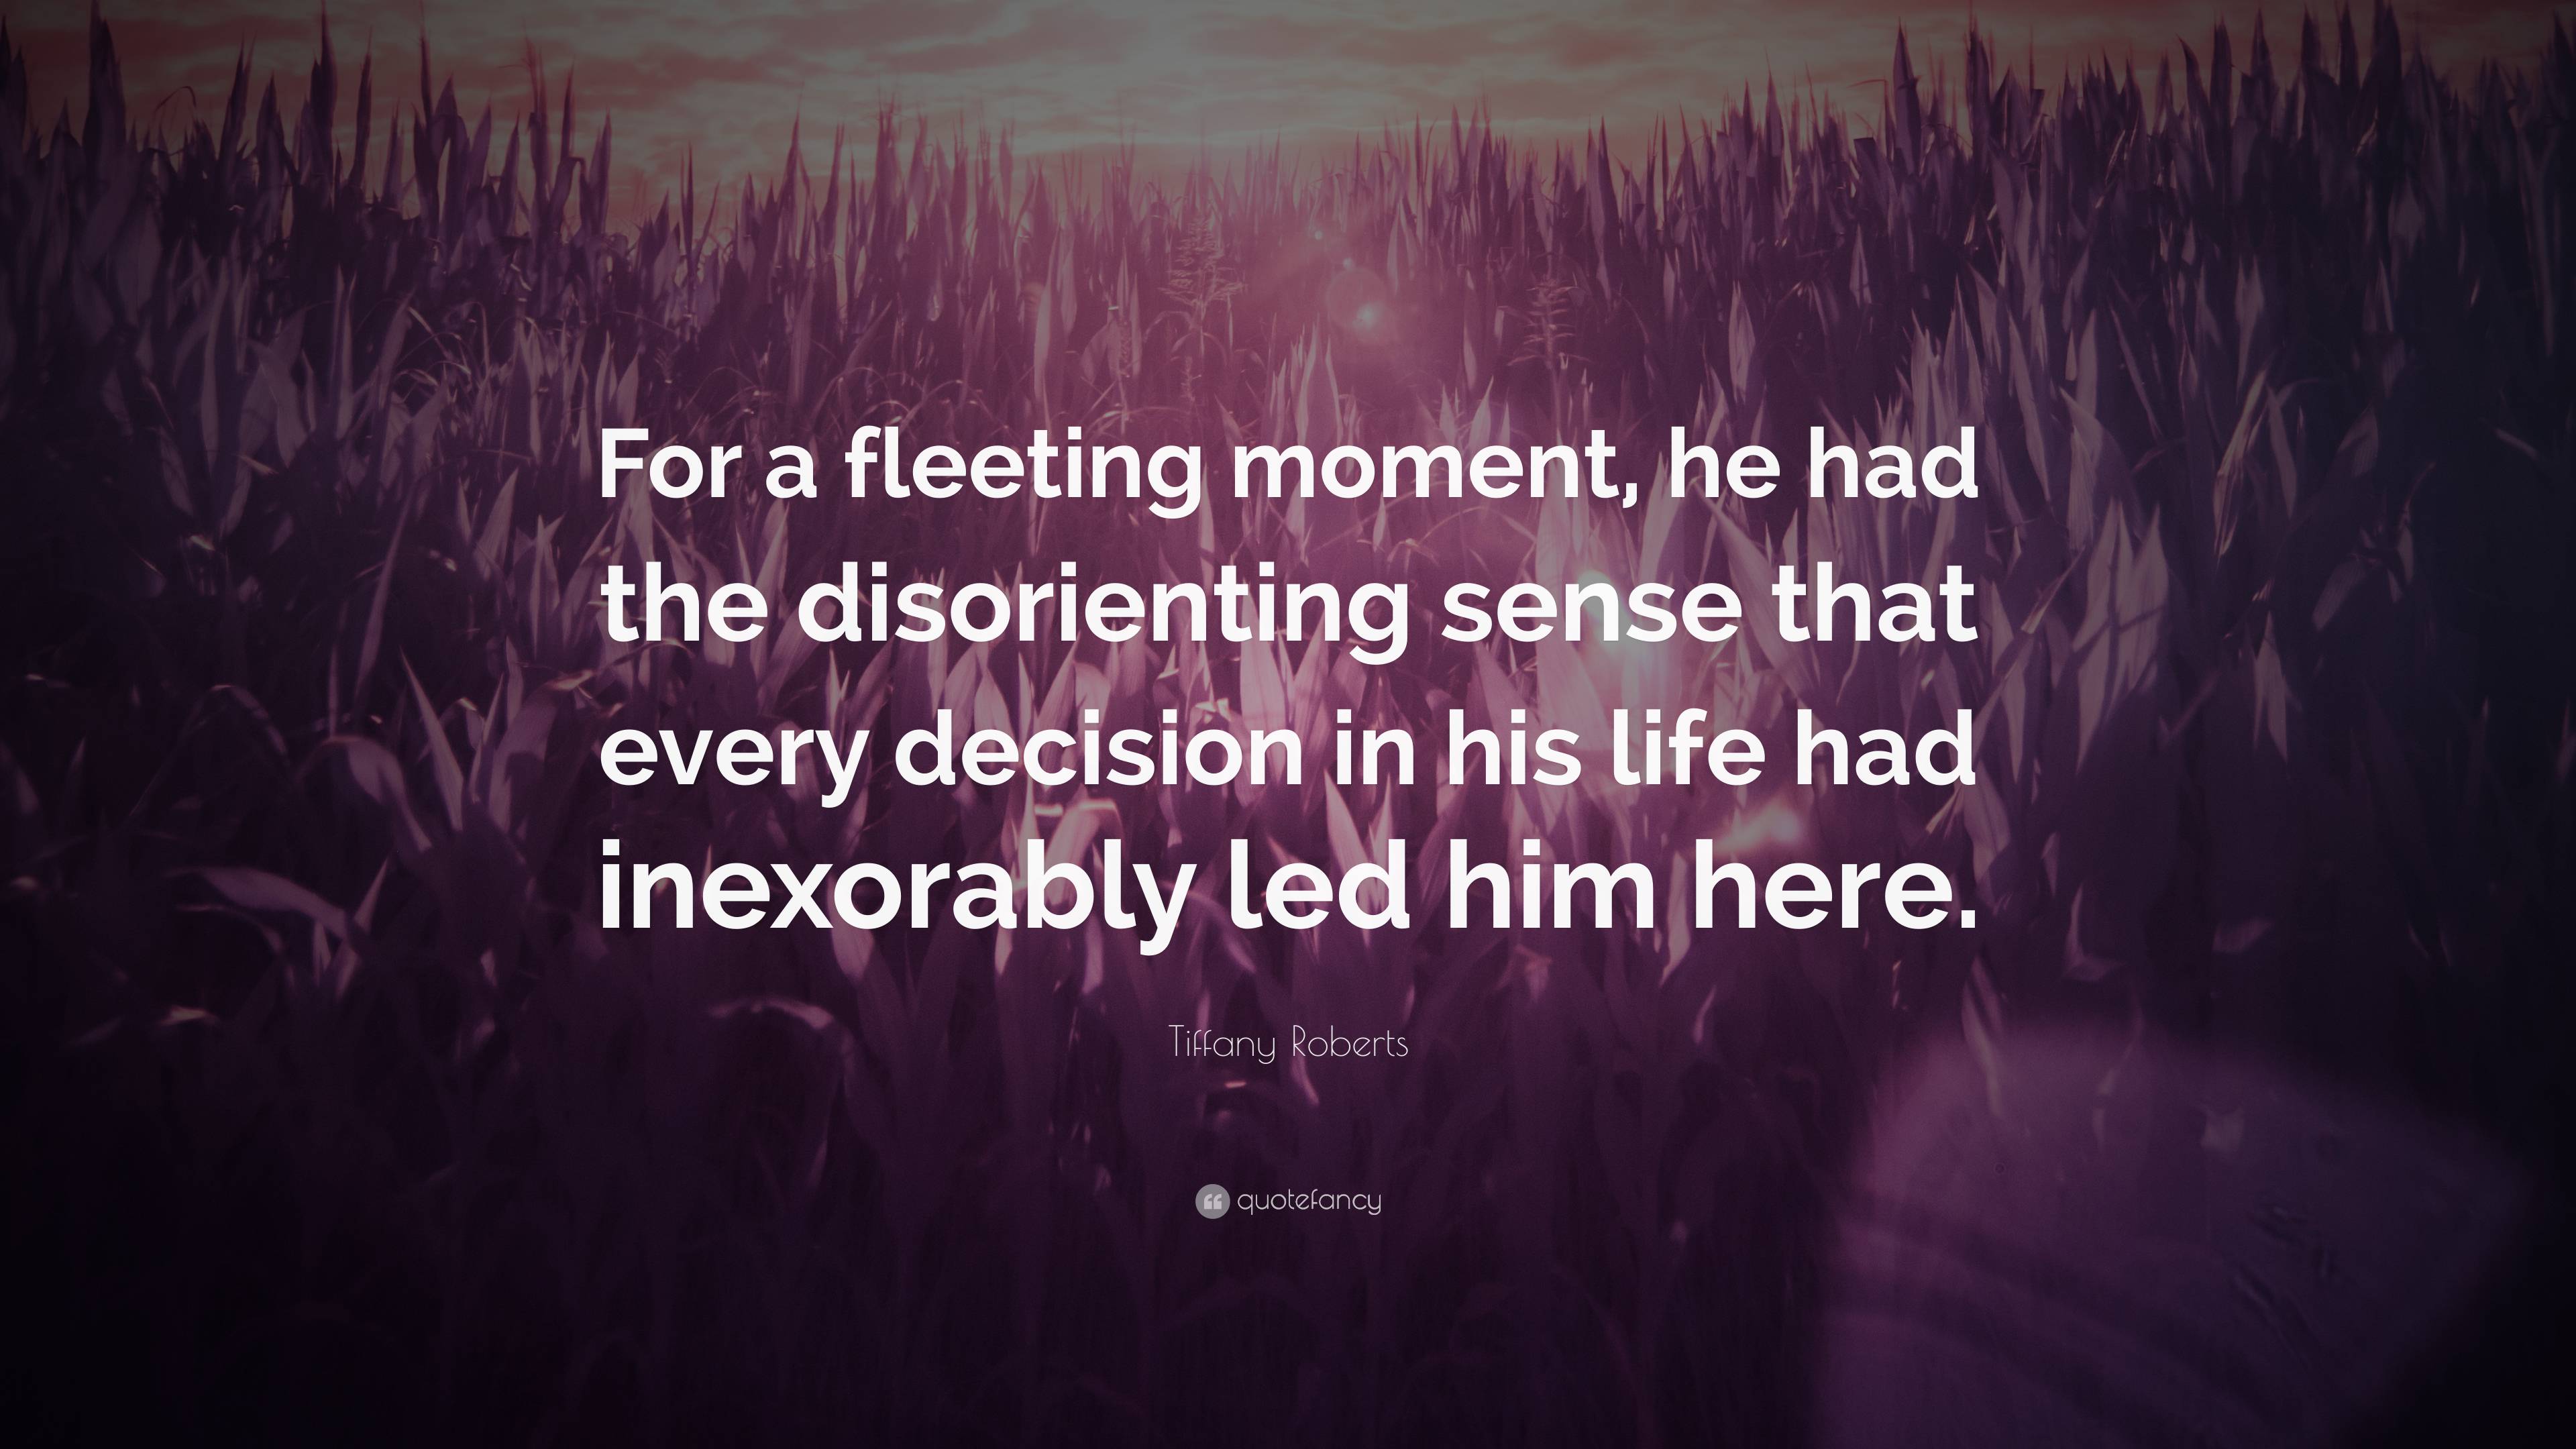 Tiffany Roberts Quote: “For a fleeting moment, he had the disorienting ...